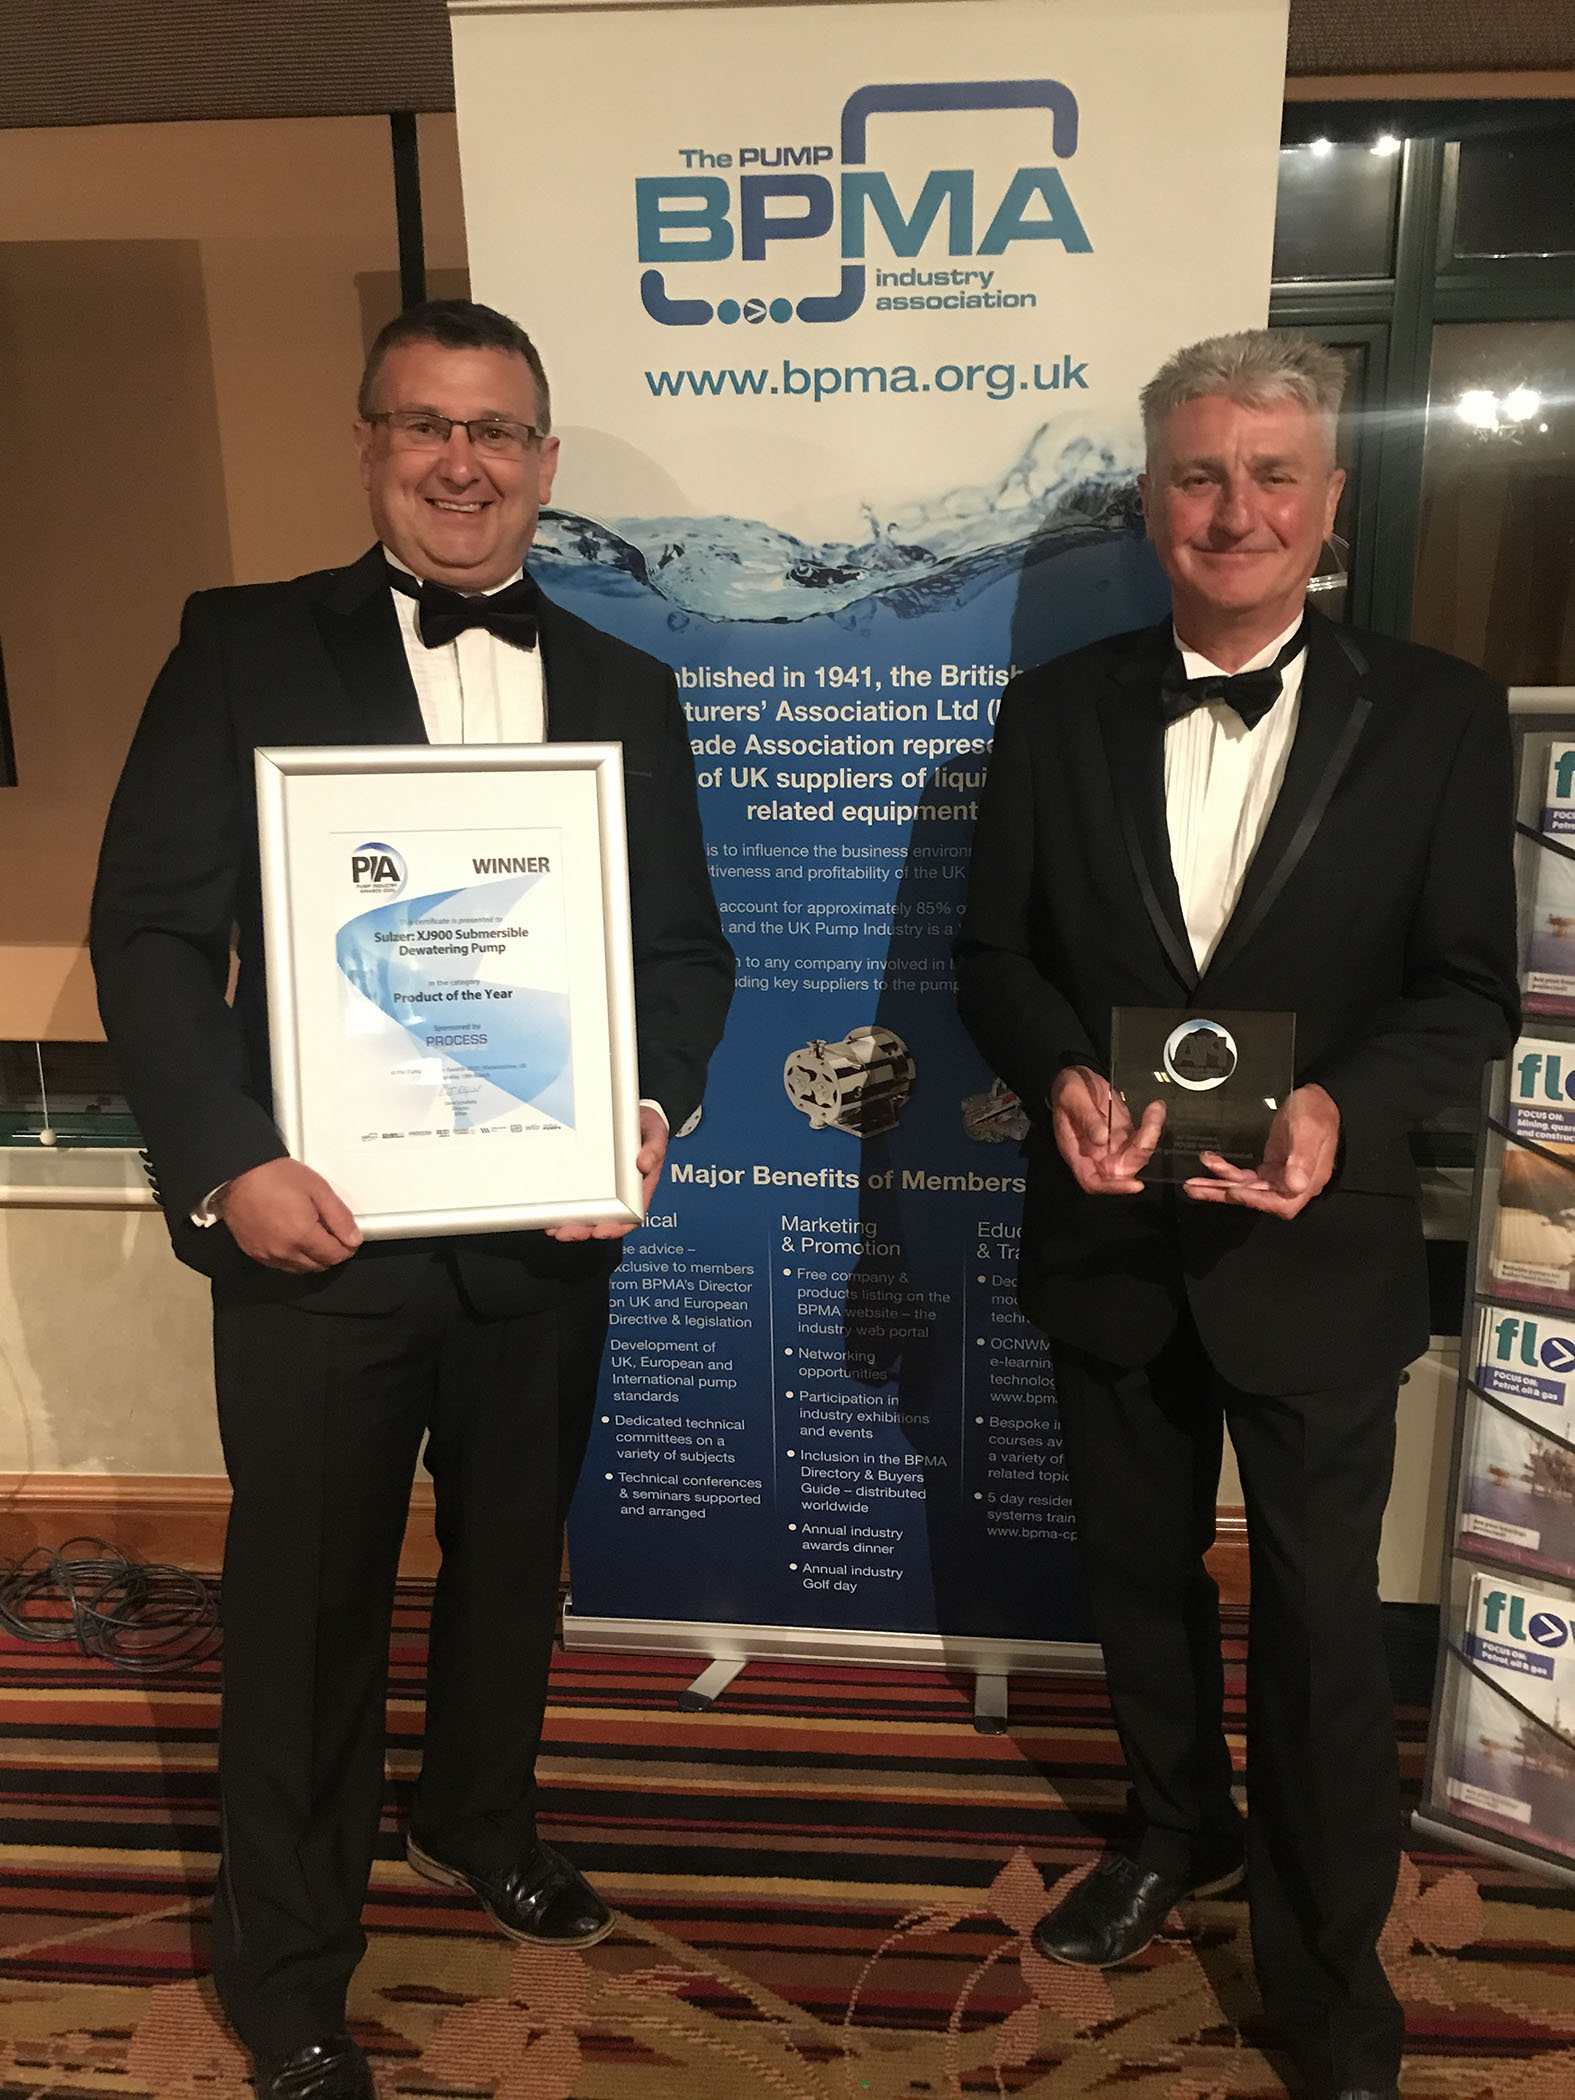 Sulzer has received the Pump Industry award for Product of the Year for their latest addition the XJ 900 dewatering pump